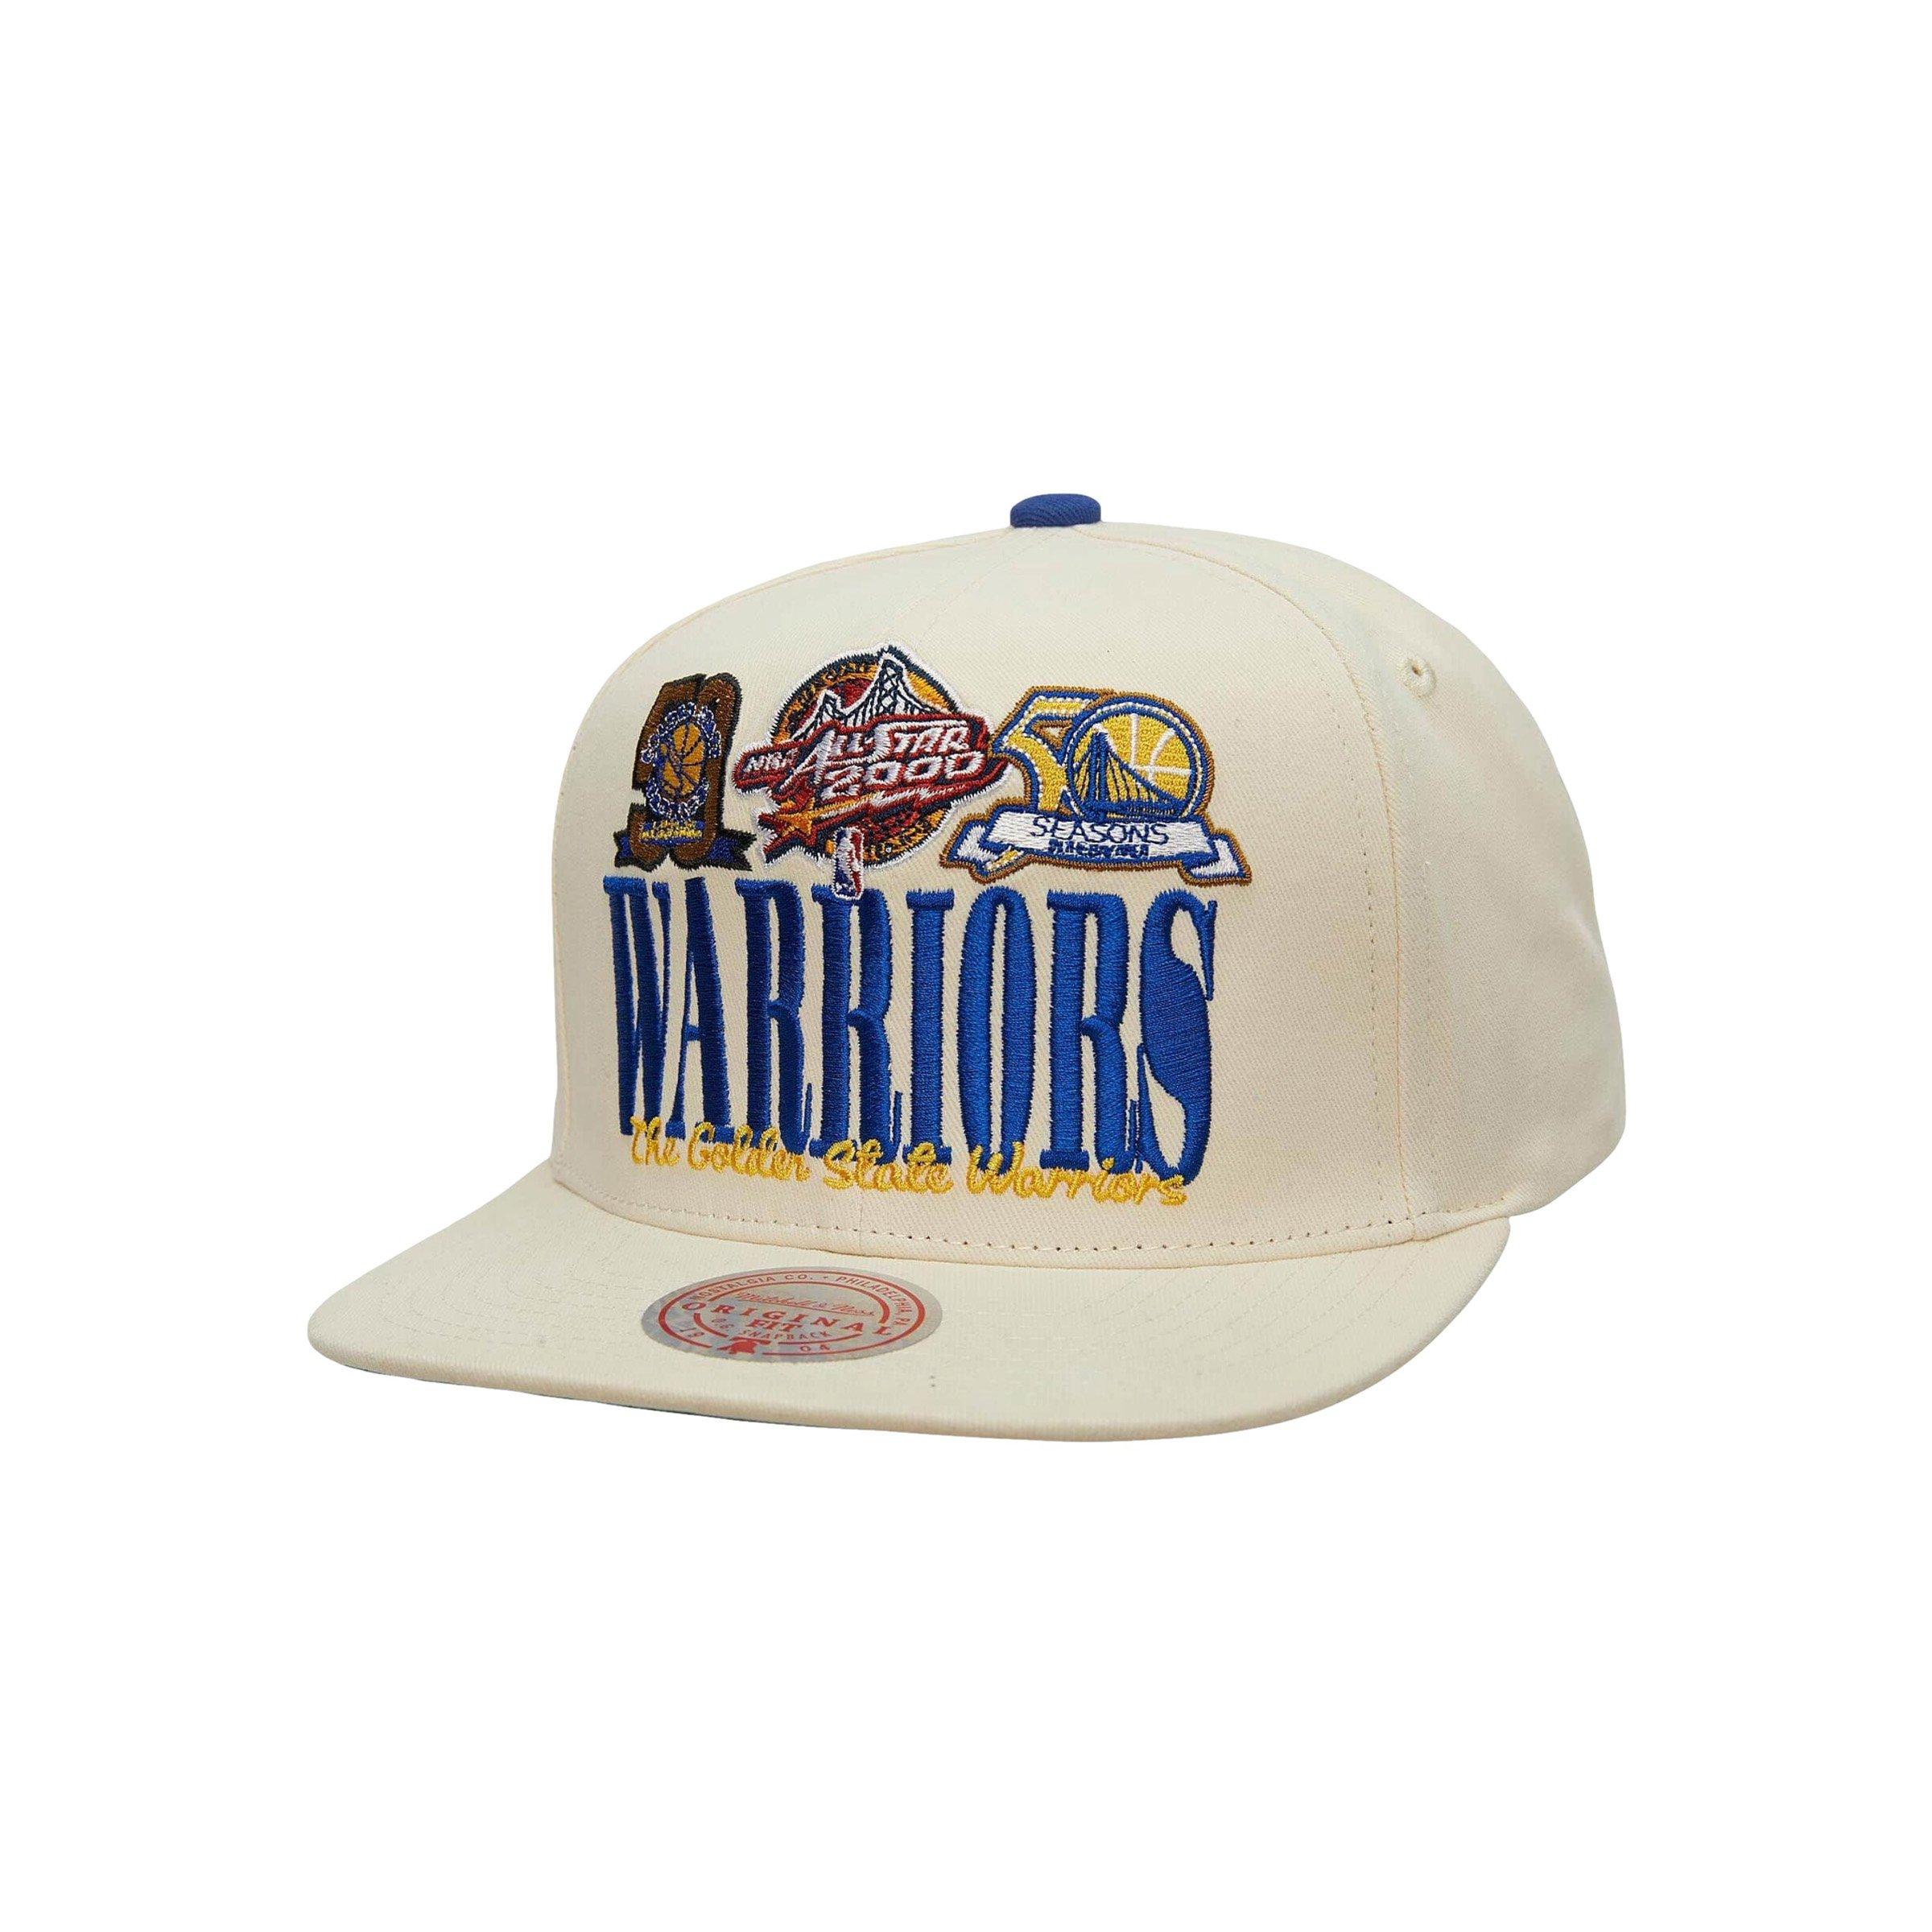 2000 NBA All-Star Game Golden State Warriors Mitchell & Ness Snapback  Hat Cap